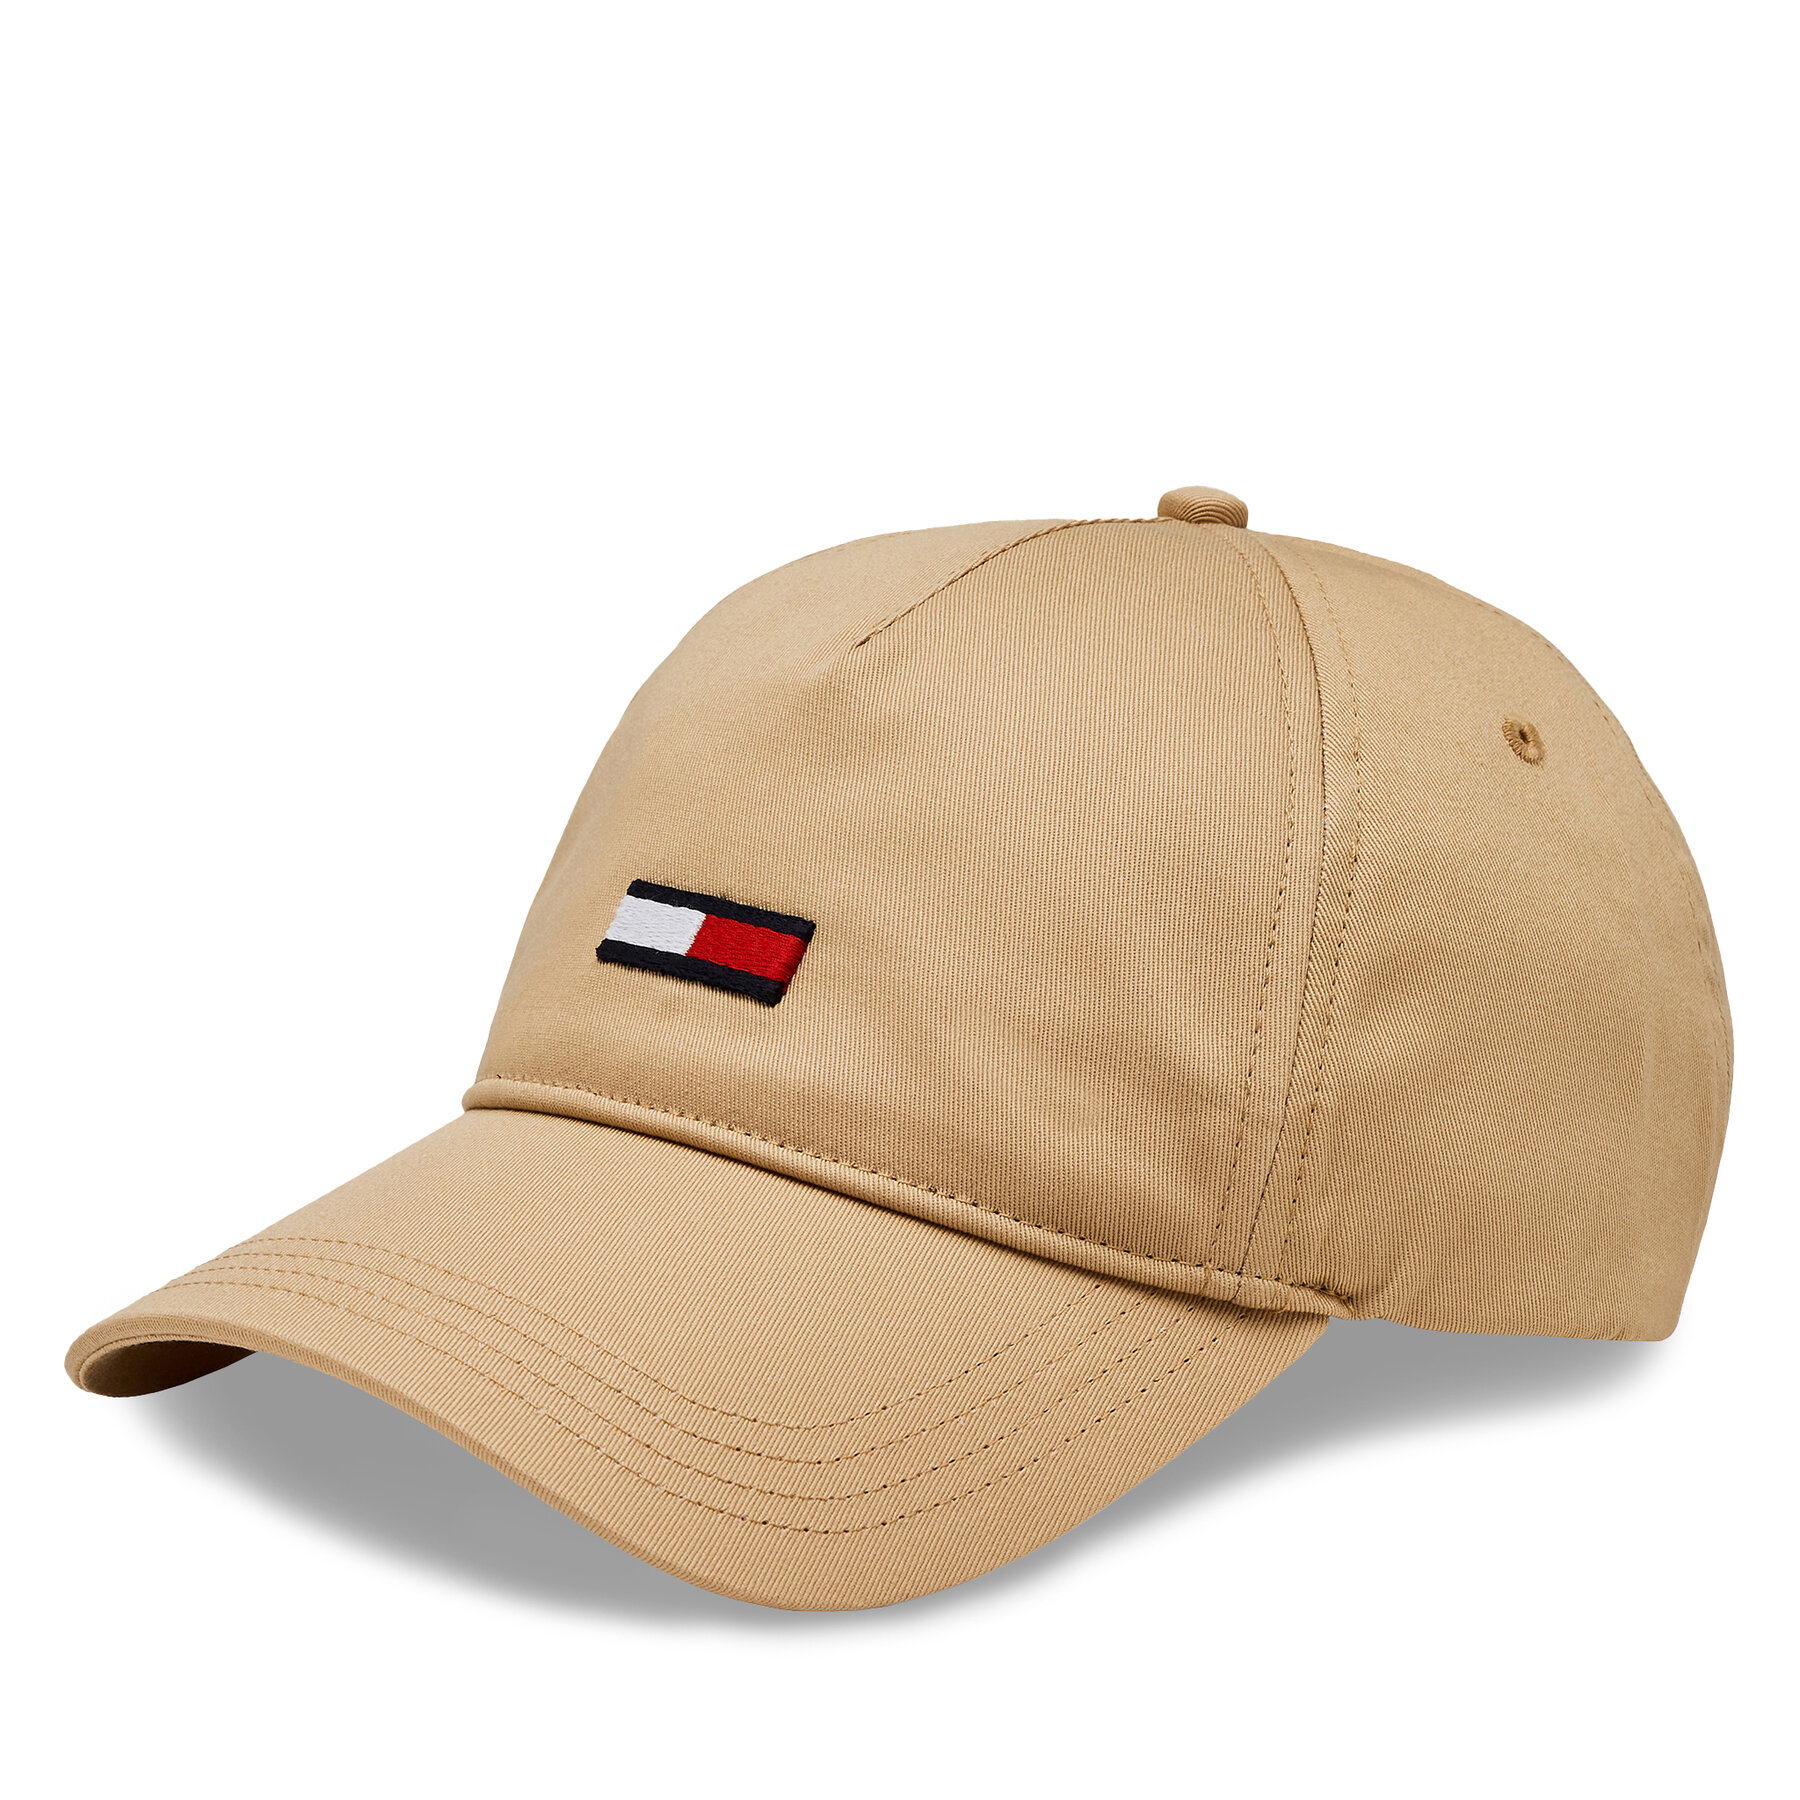 Cap Tommy Jeans Elongated AM0AM11692 Tawny Sand AB0 von Tommy Jeans